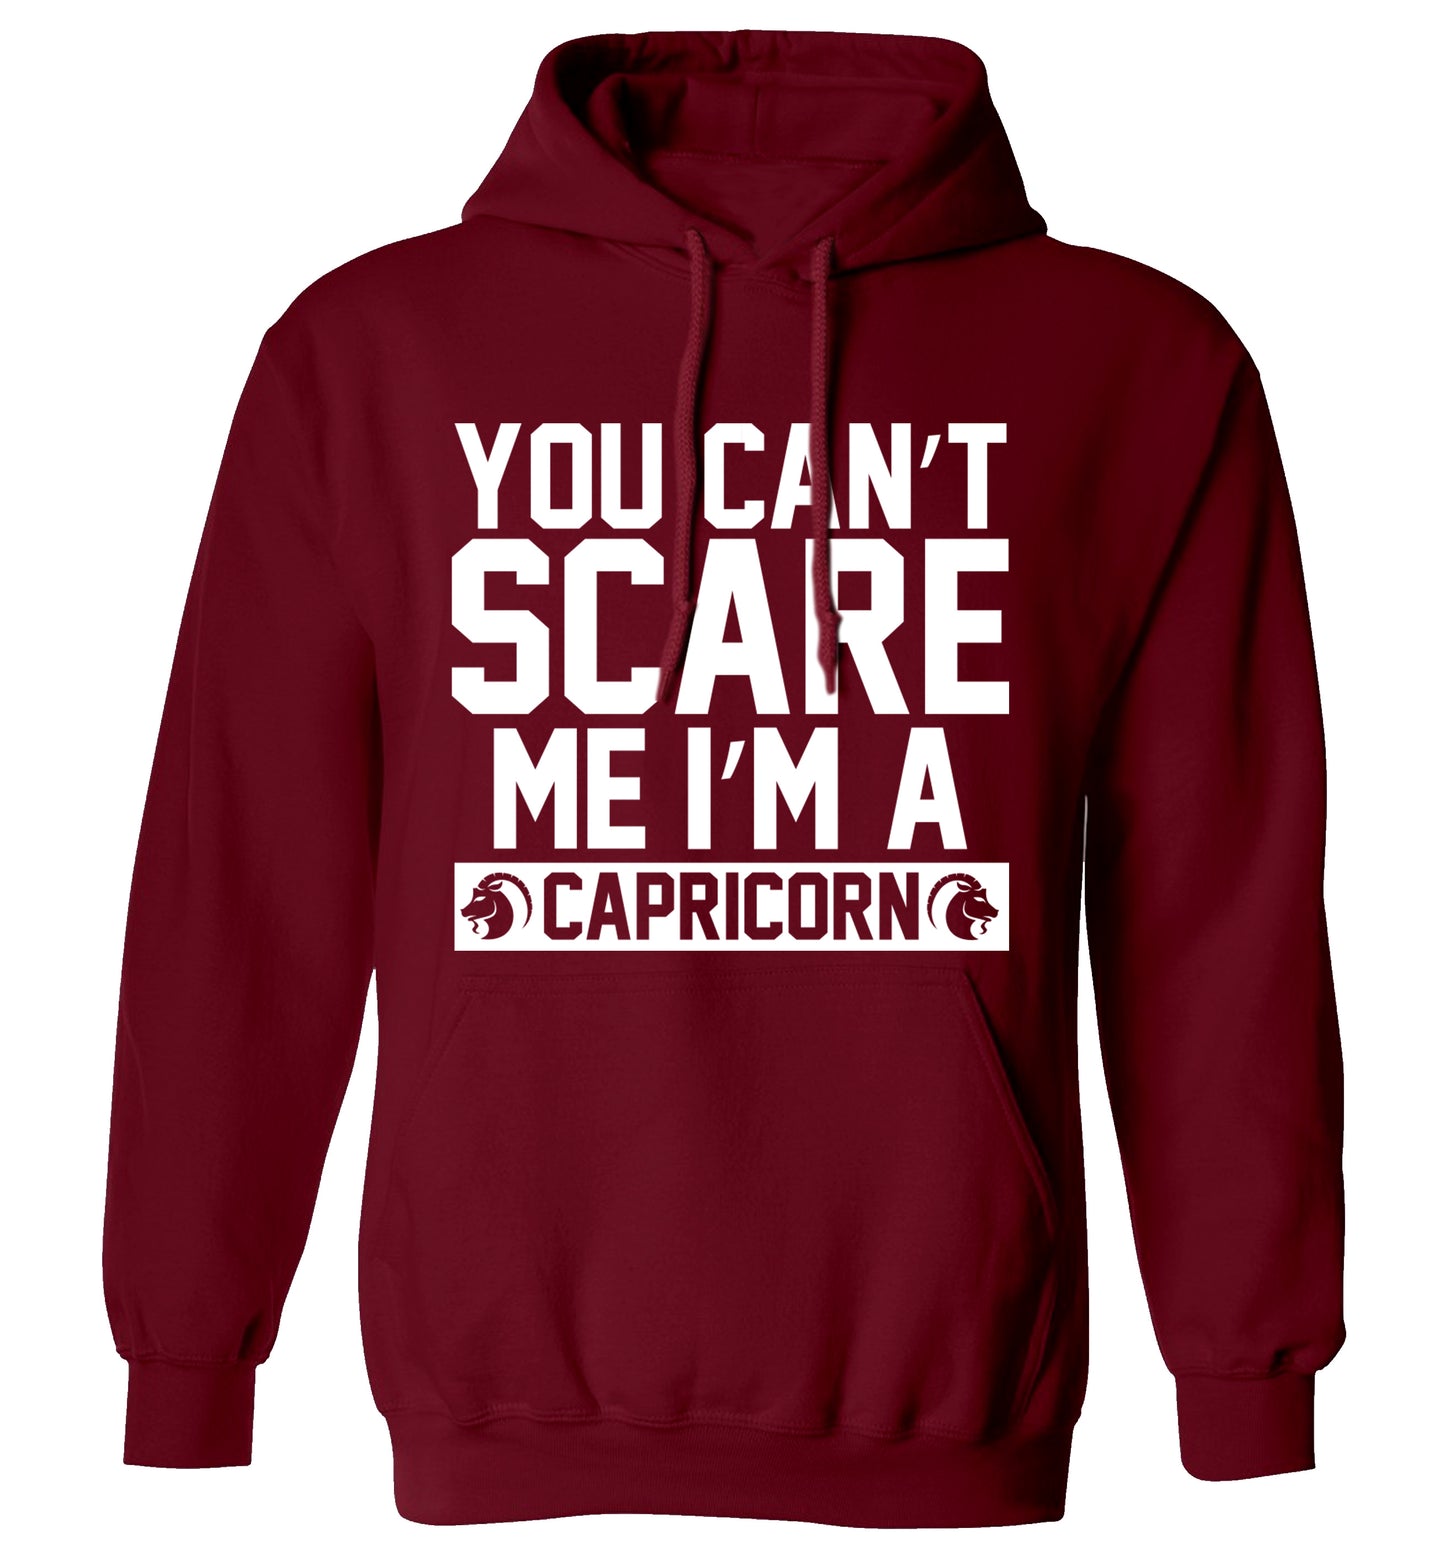 You can't scare me I'm a capricorn adults unisex maroon hoodie 2XL